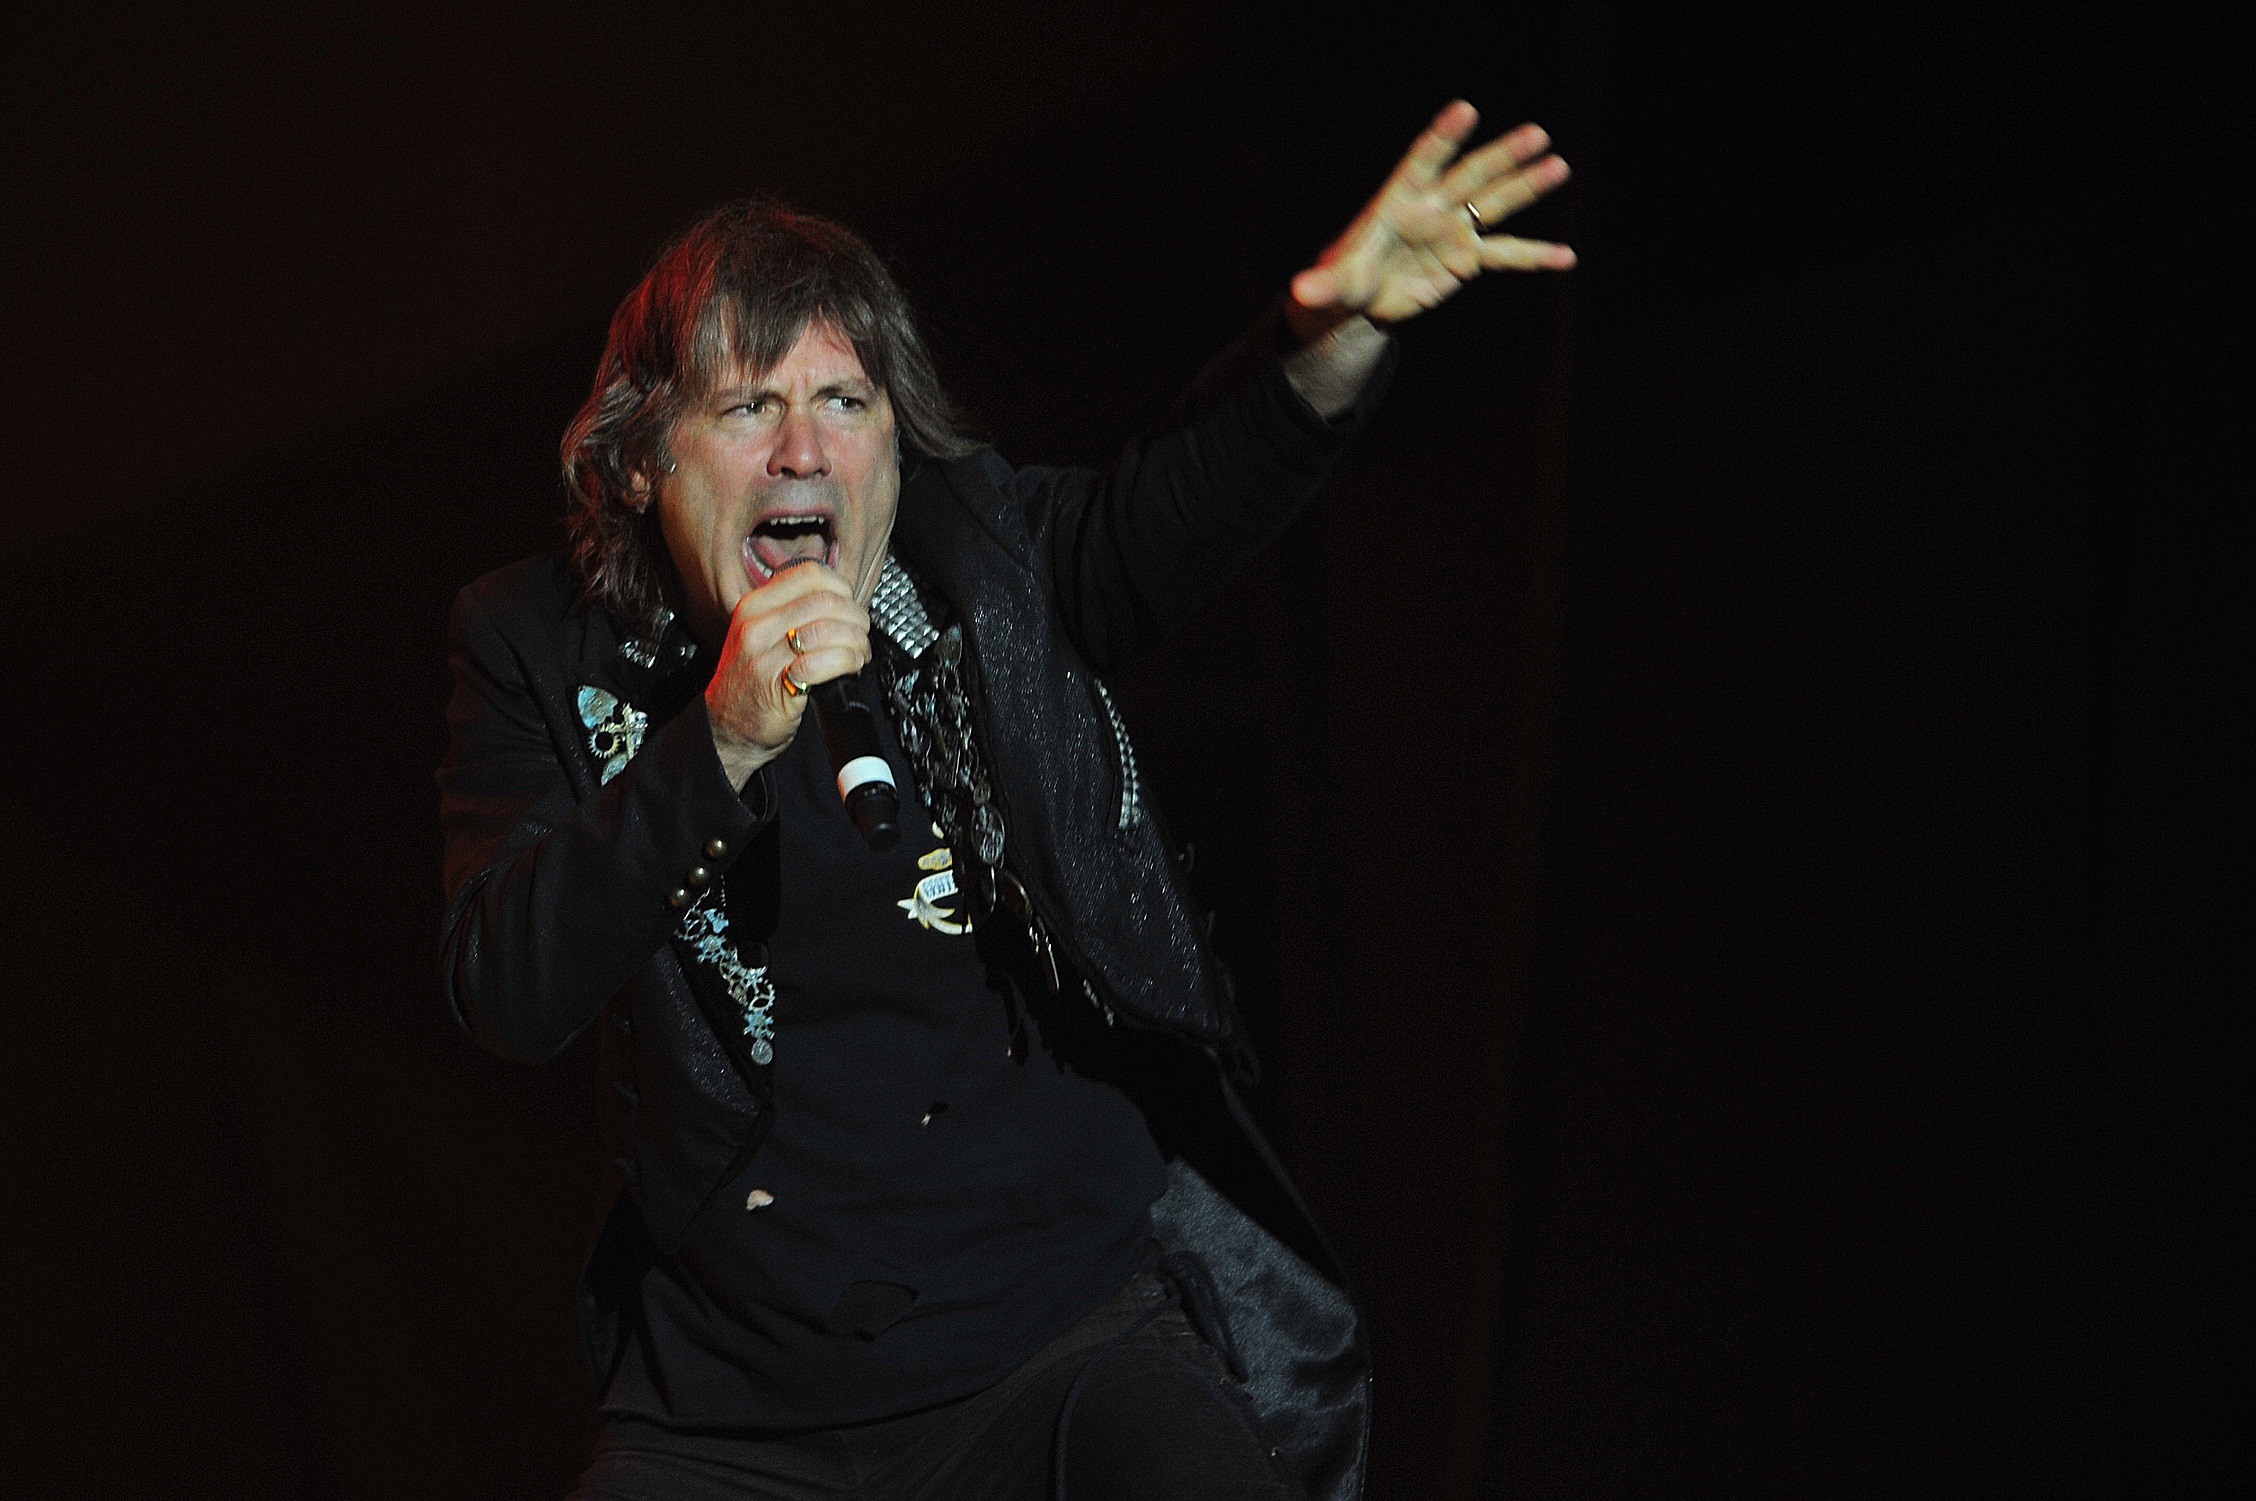 Bruce Dickinson is the richest member of Iron Maiden.